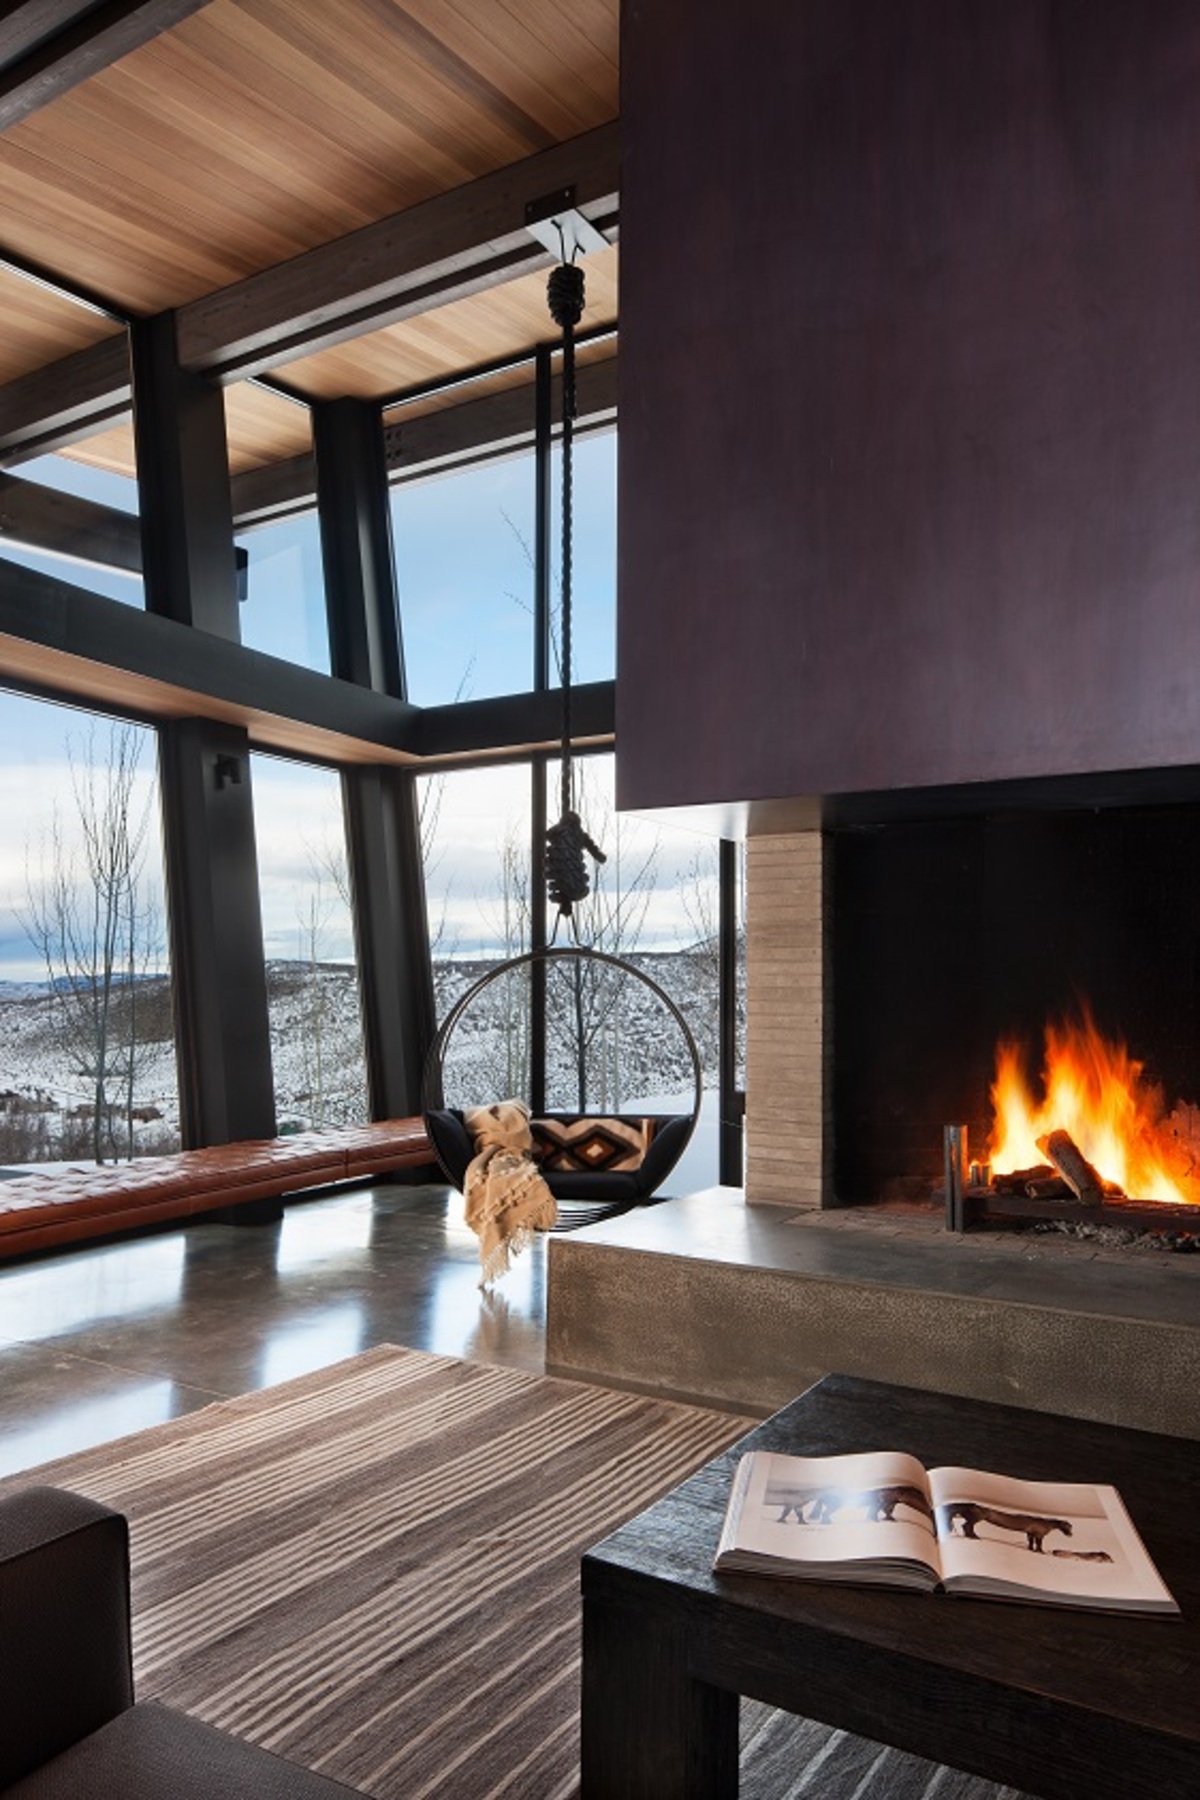 In this modern living room, concrete floors complement the concrete hearth of the fireplace, while a hanging chair and bench along the windows creates additional seating.